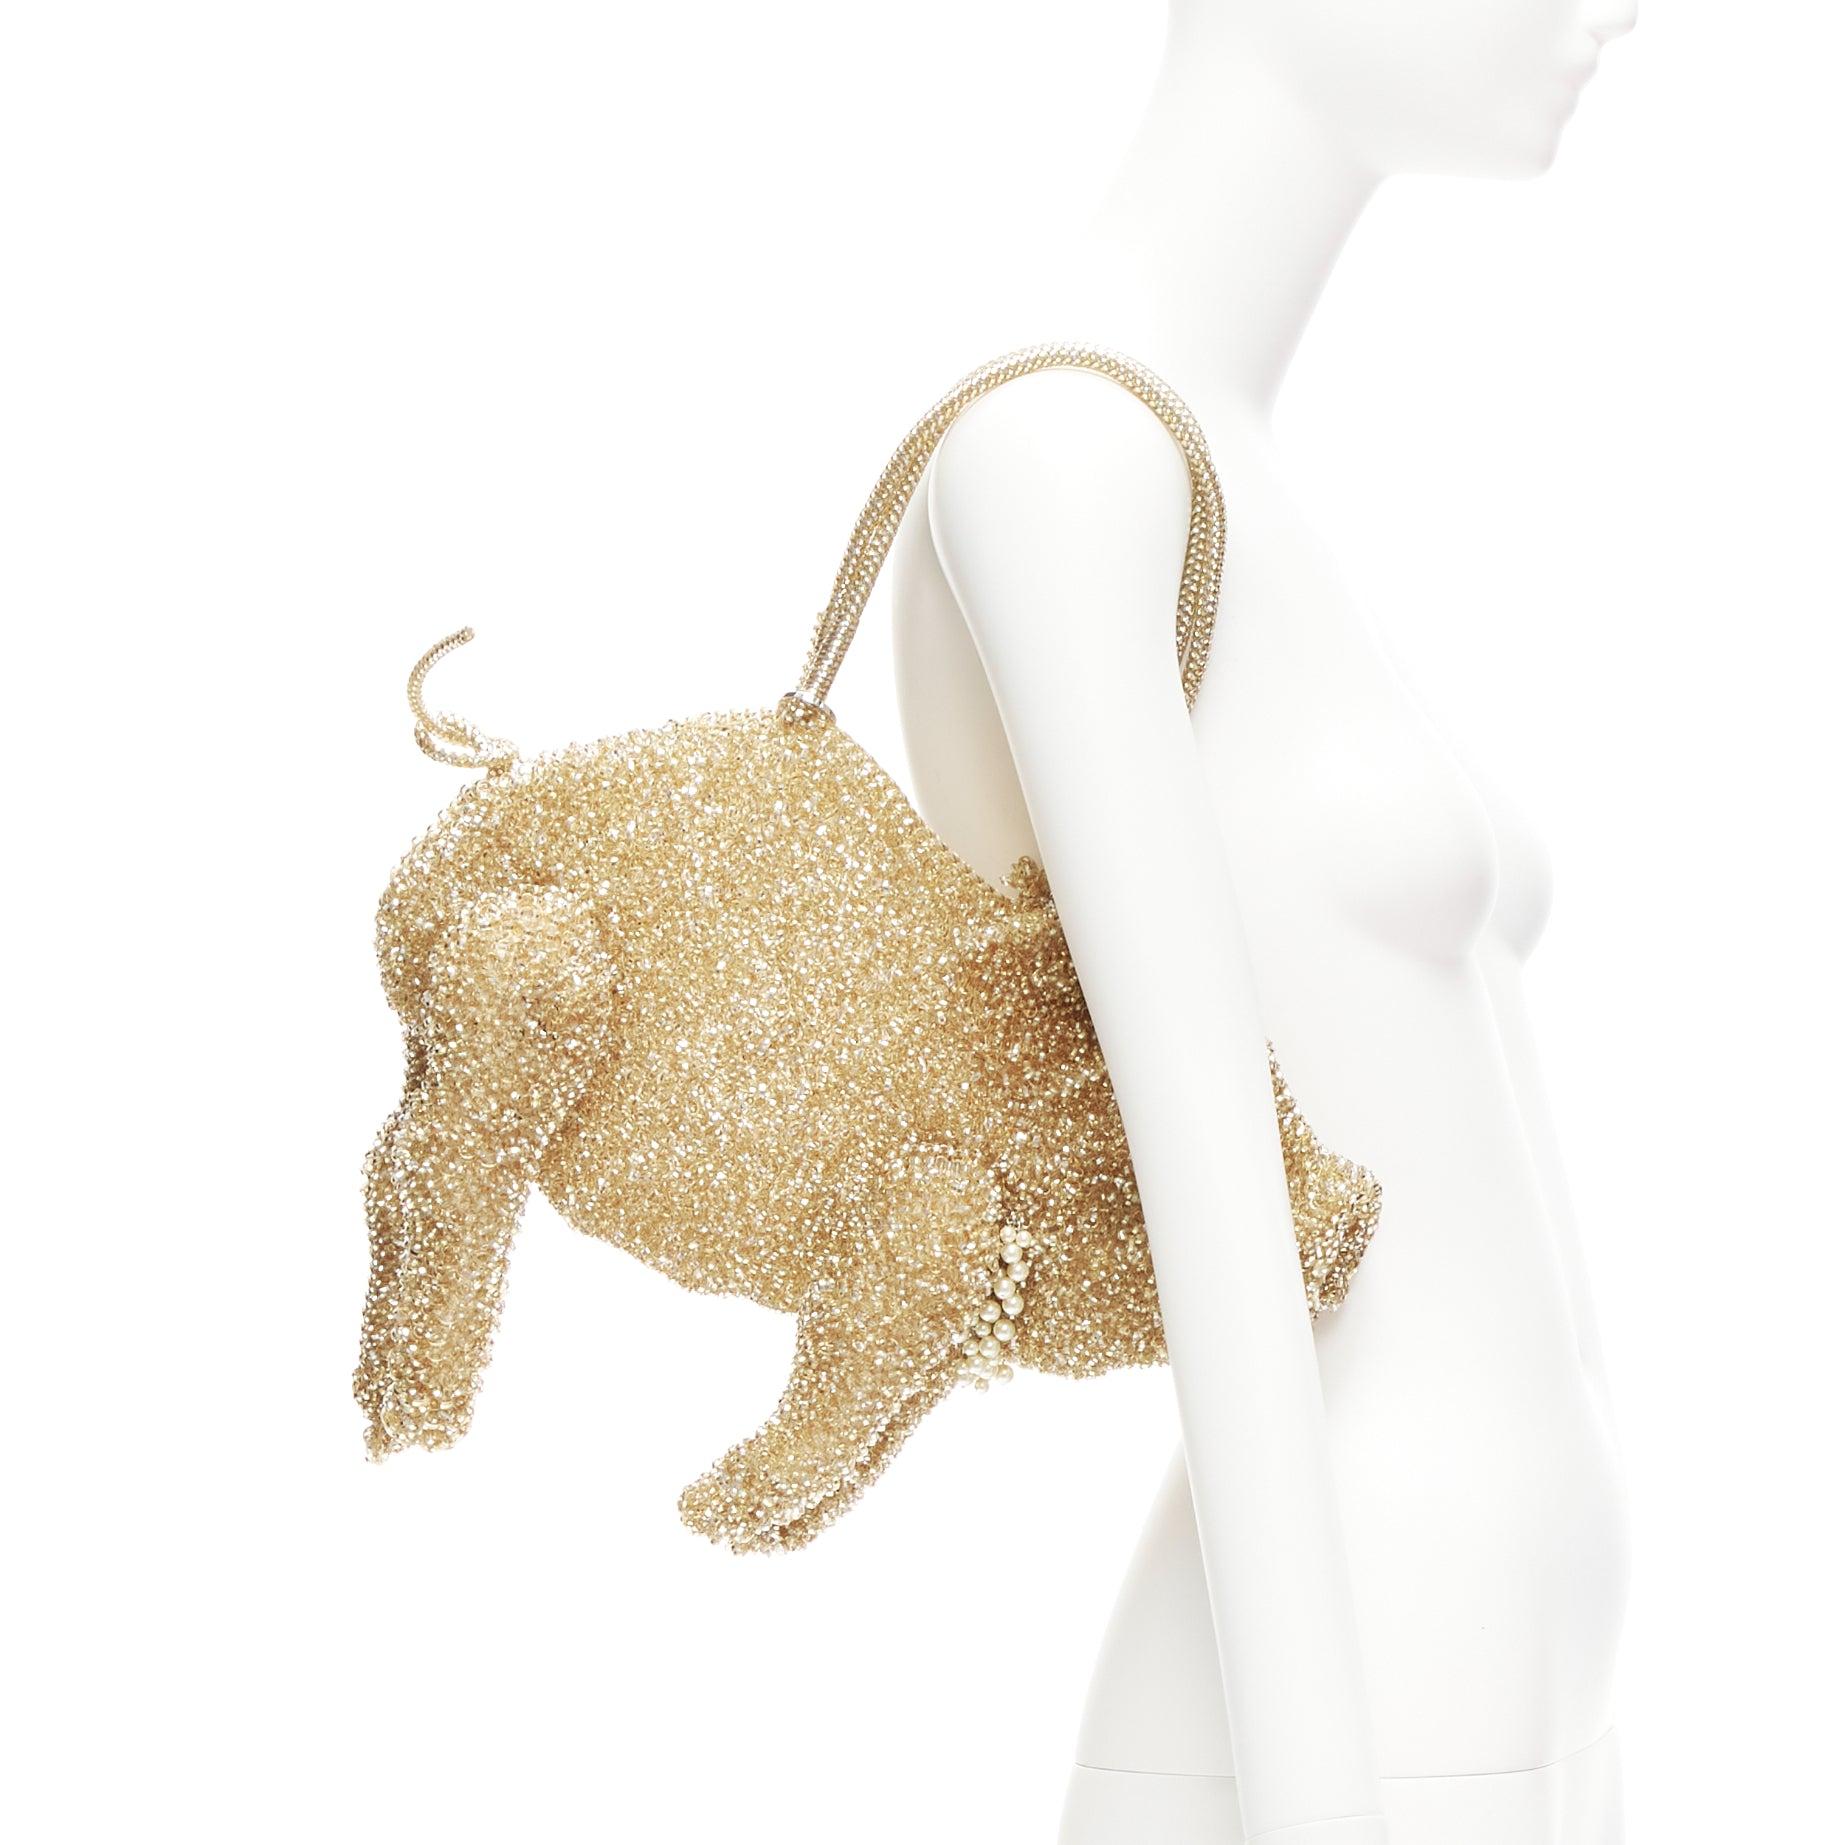 rare ANTEPRIMA FRANC FRANC Wire Bag gold Pig pearl necklace bag
Reference: ANWU/A01065
Brand: Anteprima
Material: Plastic
Color: Gold
Pattern: Solid
Extra Details: Pearl embellishments at pig's neck

CONDITION:
Condition: Excellent, this item was